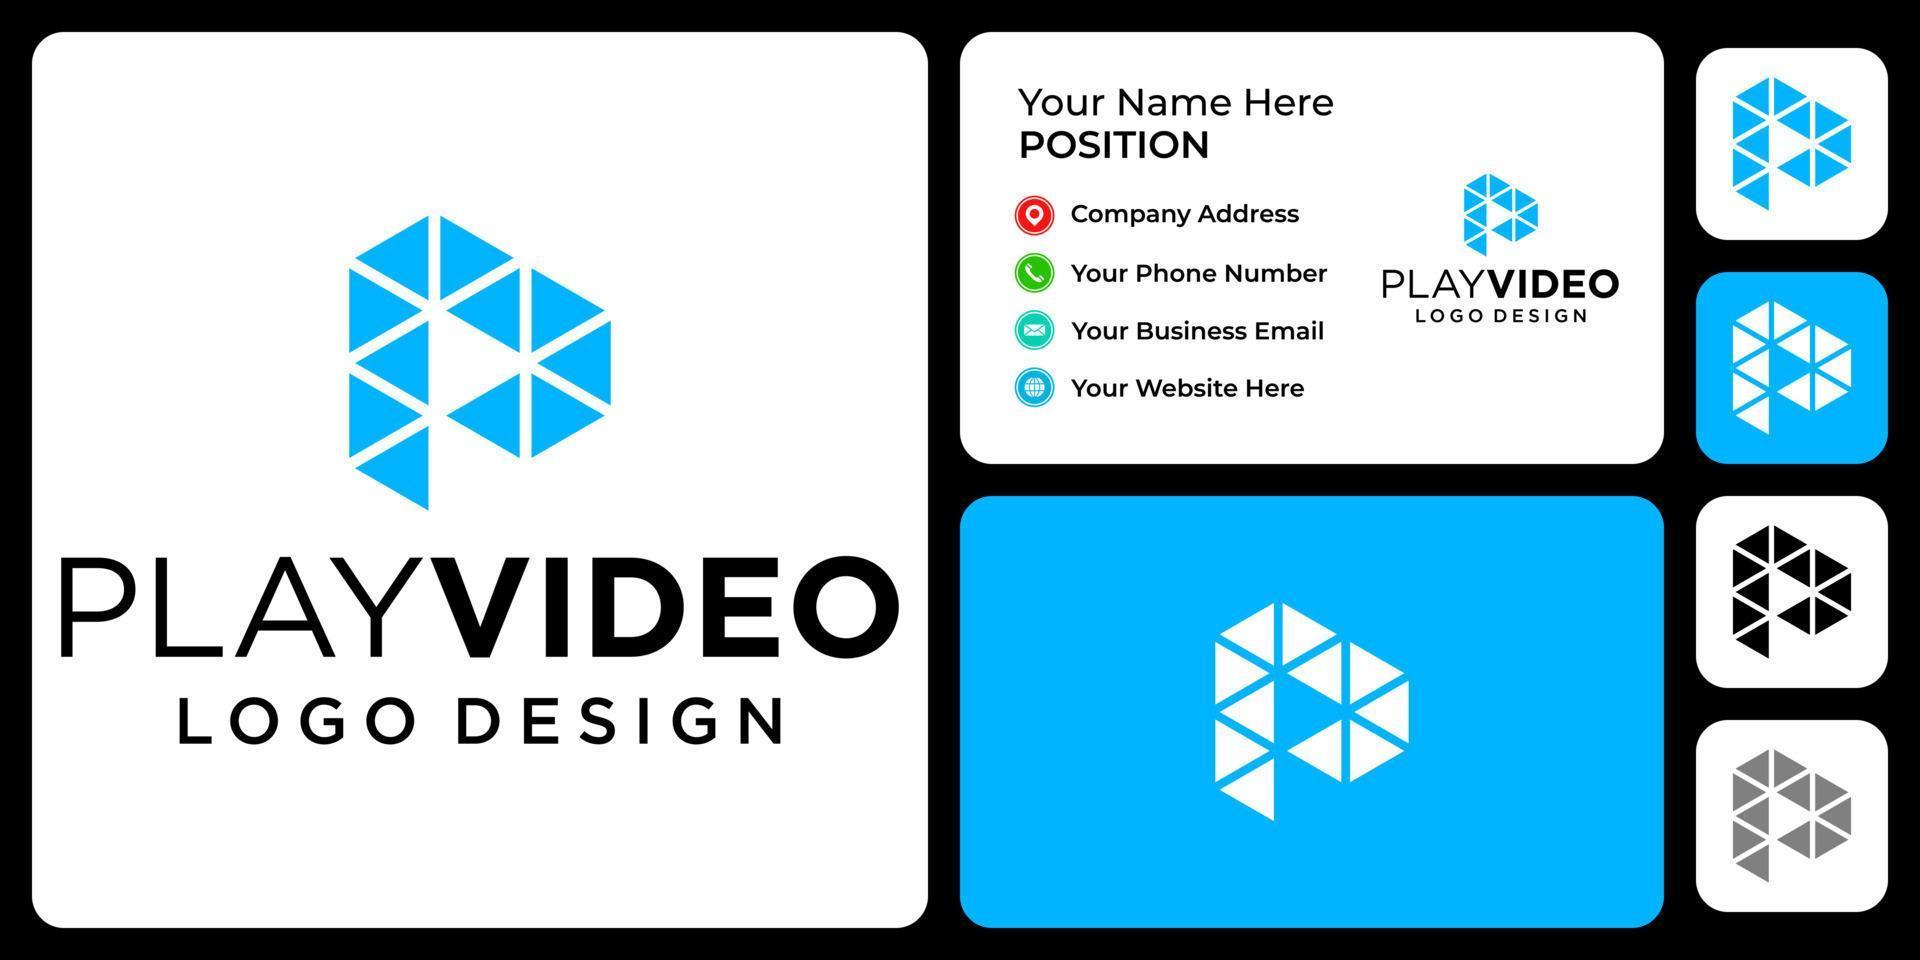 Letter P monogram video logo design with business card template. vector